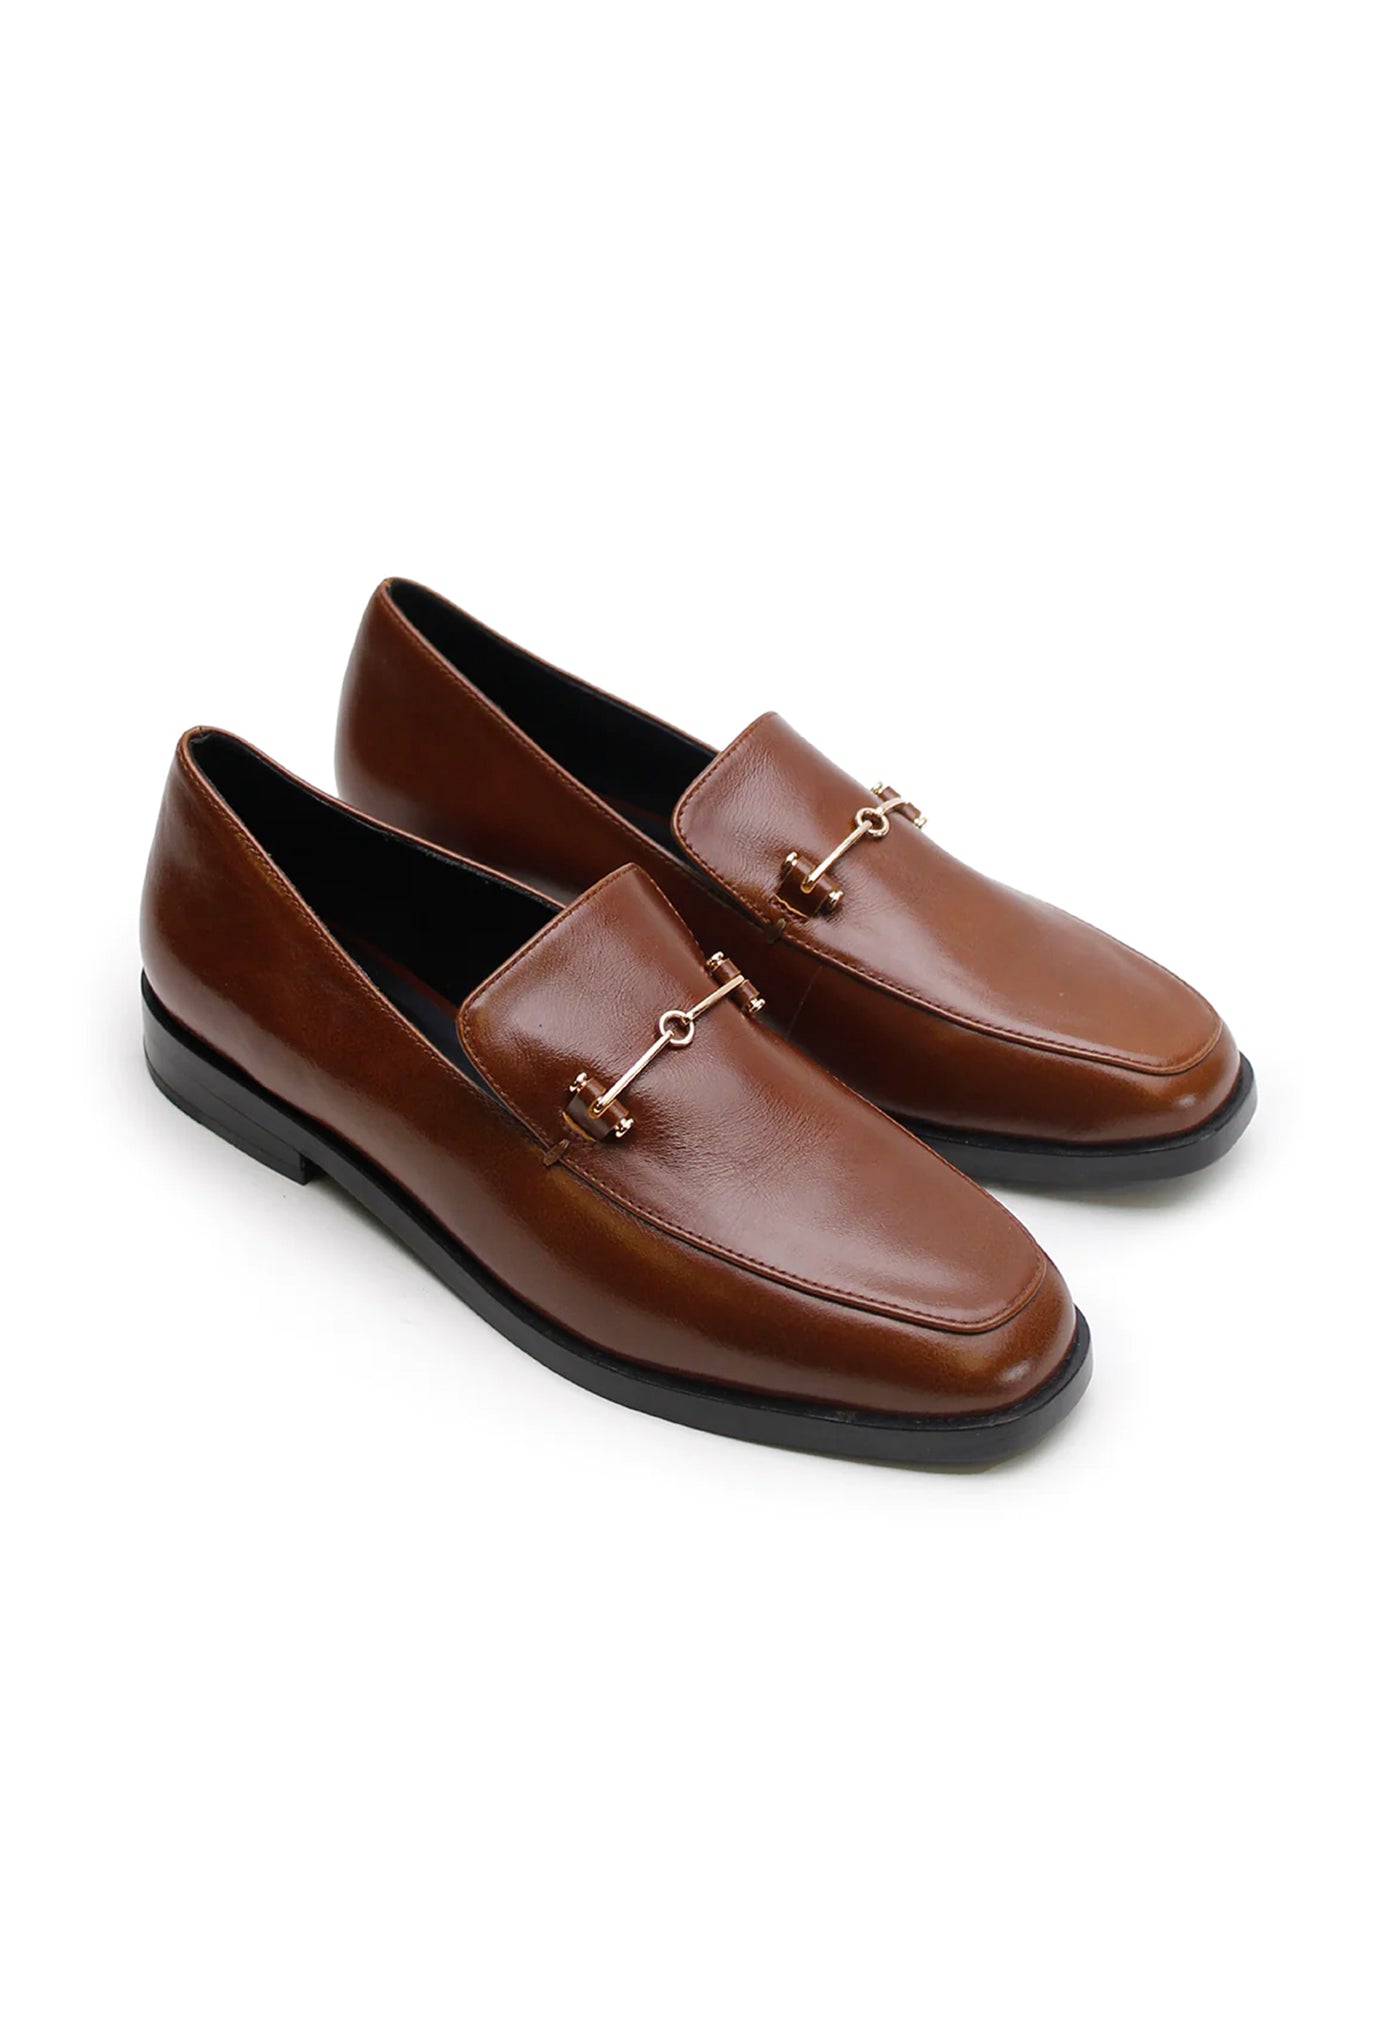 Suit Loafer - Pecan/Gold sold by Angel Divine